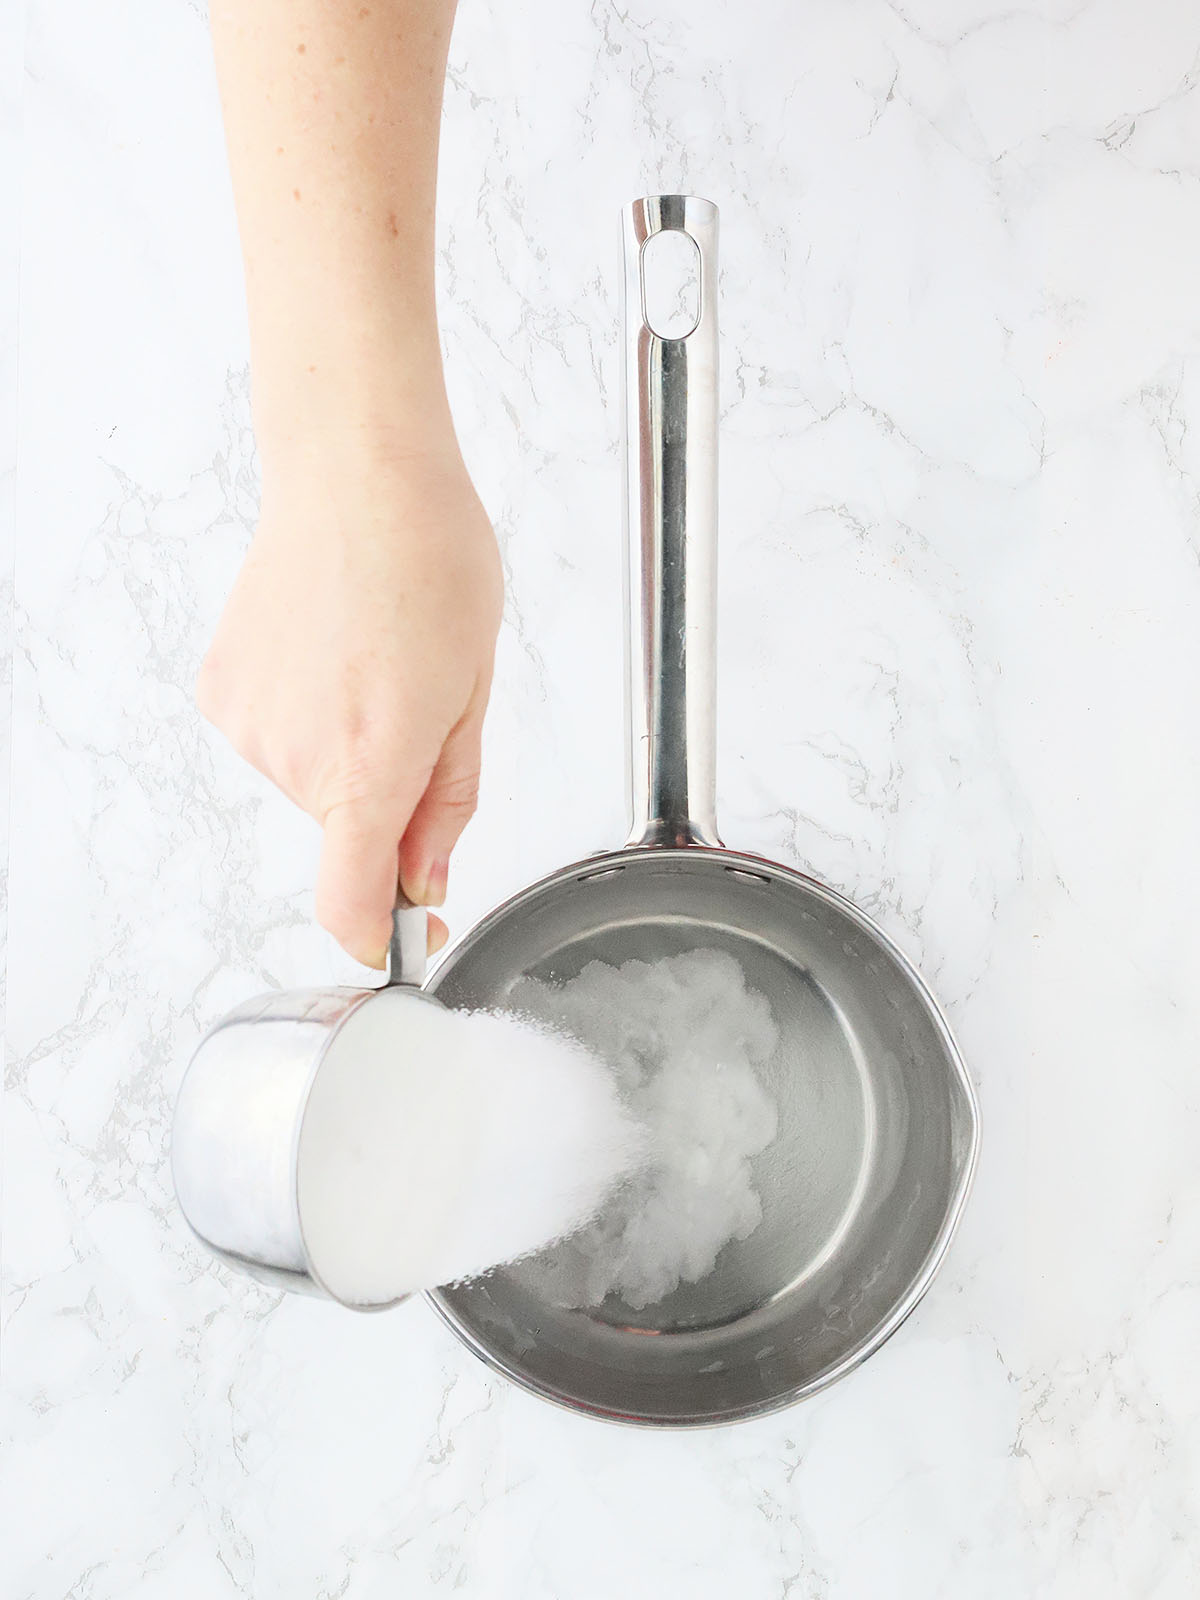 pouring sugar into the water in a stainless steel saucepan